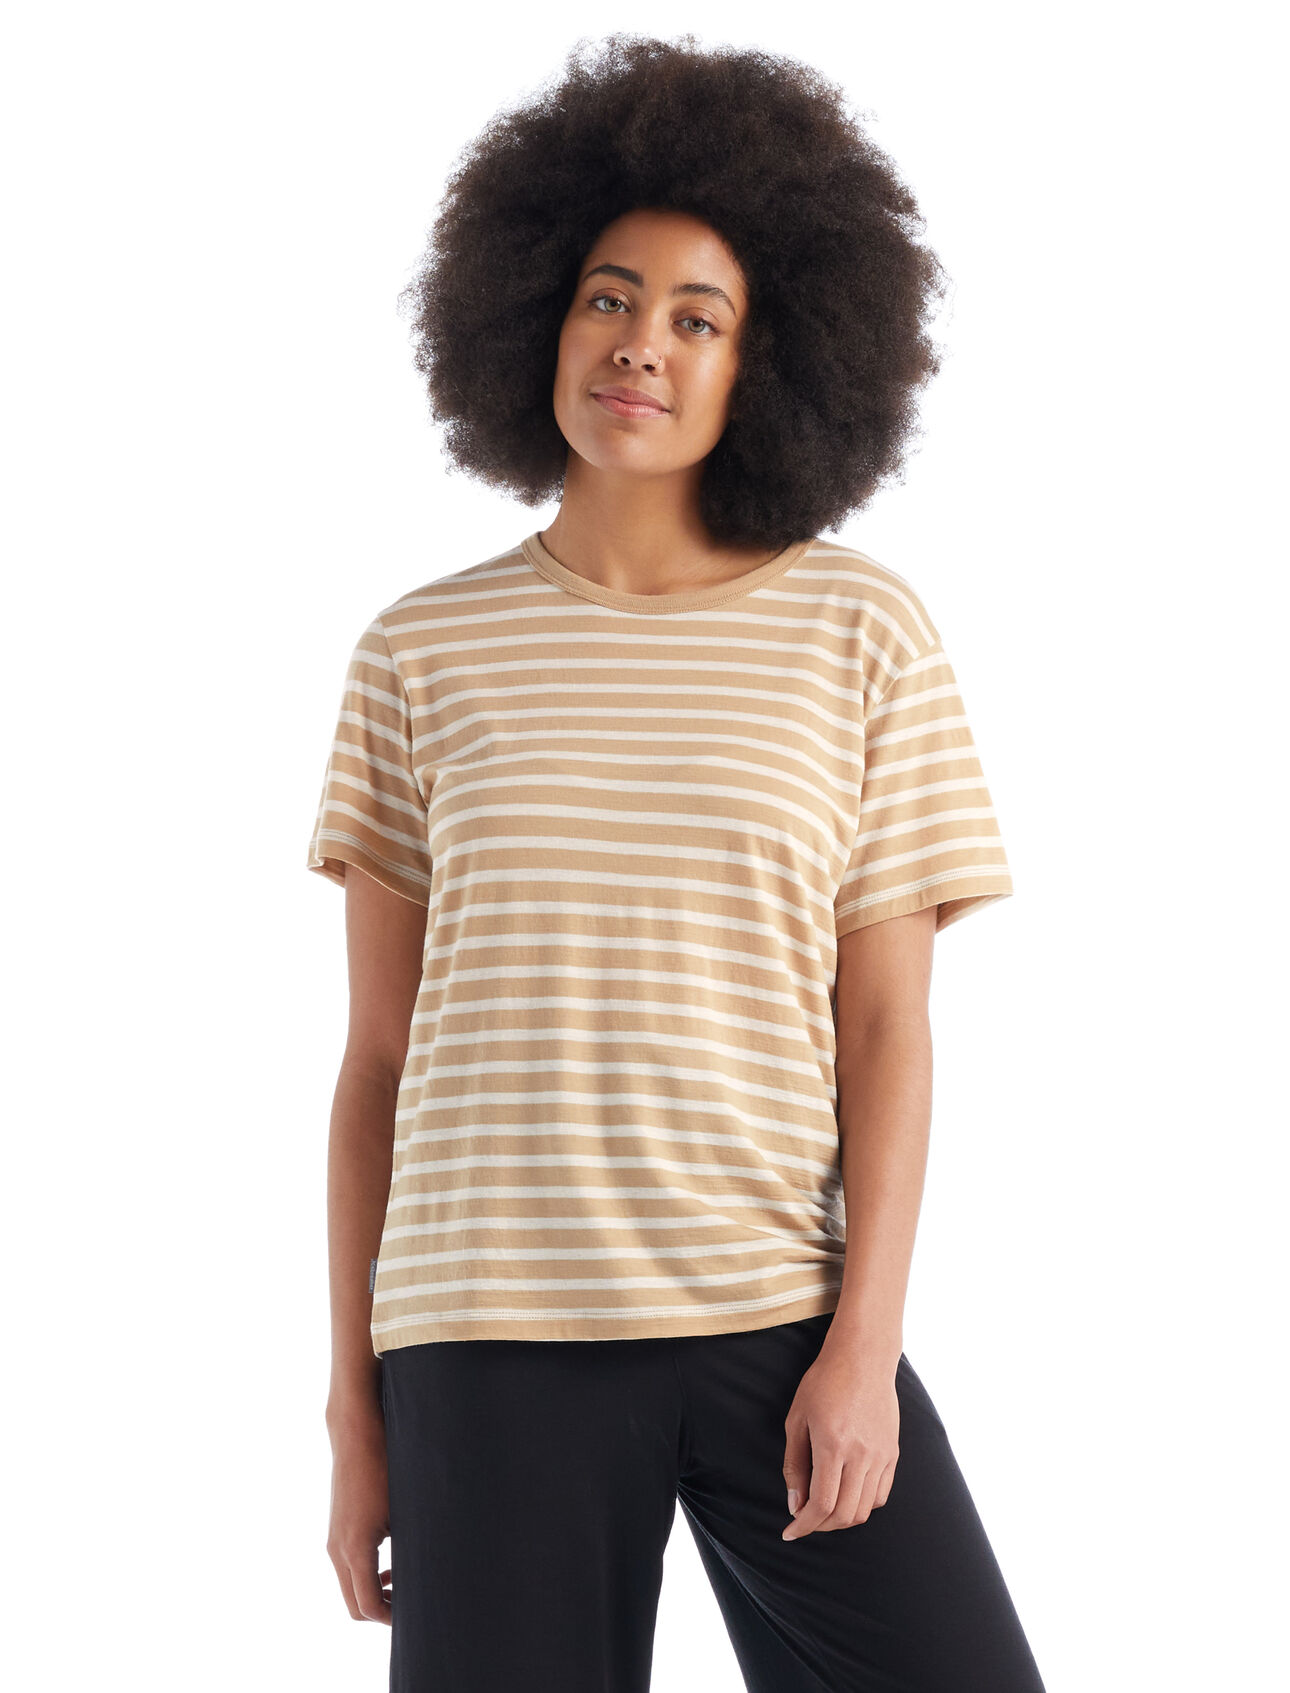 Womens Merino Granary Short Sleeve Stripe T-Shirt A classic tee with a relaxed fit and soft, breathable, 100% merino wool fabric, the Granary Short Sleeve Tee Stripe is all about everyday comfort and style.